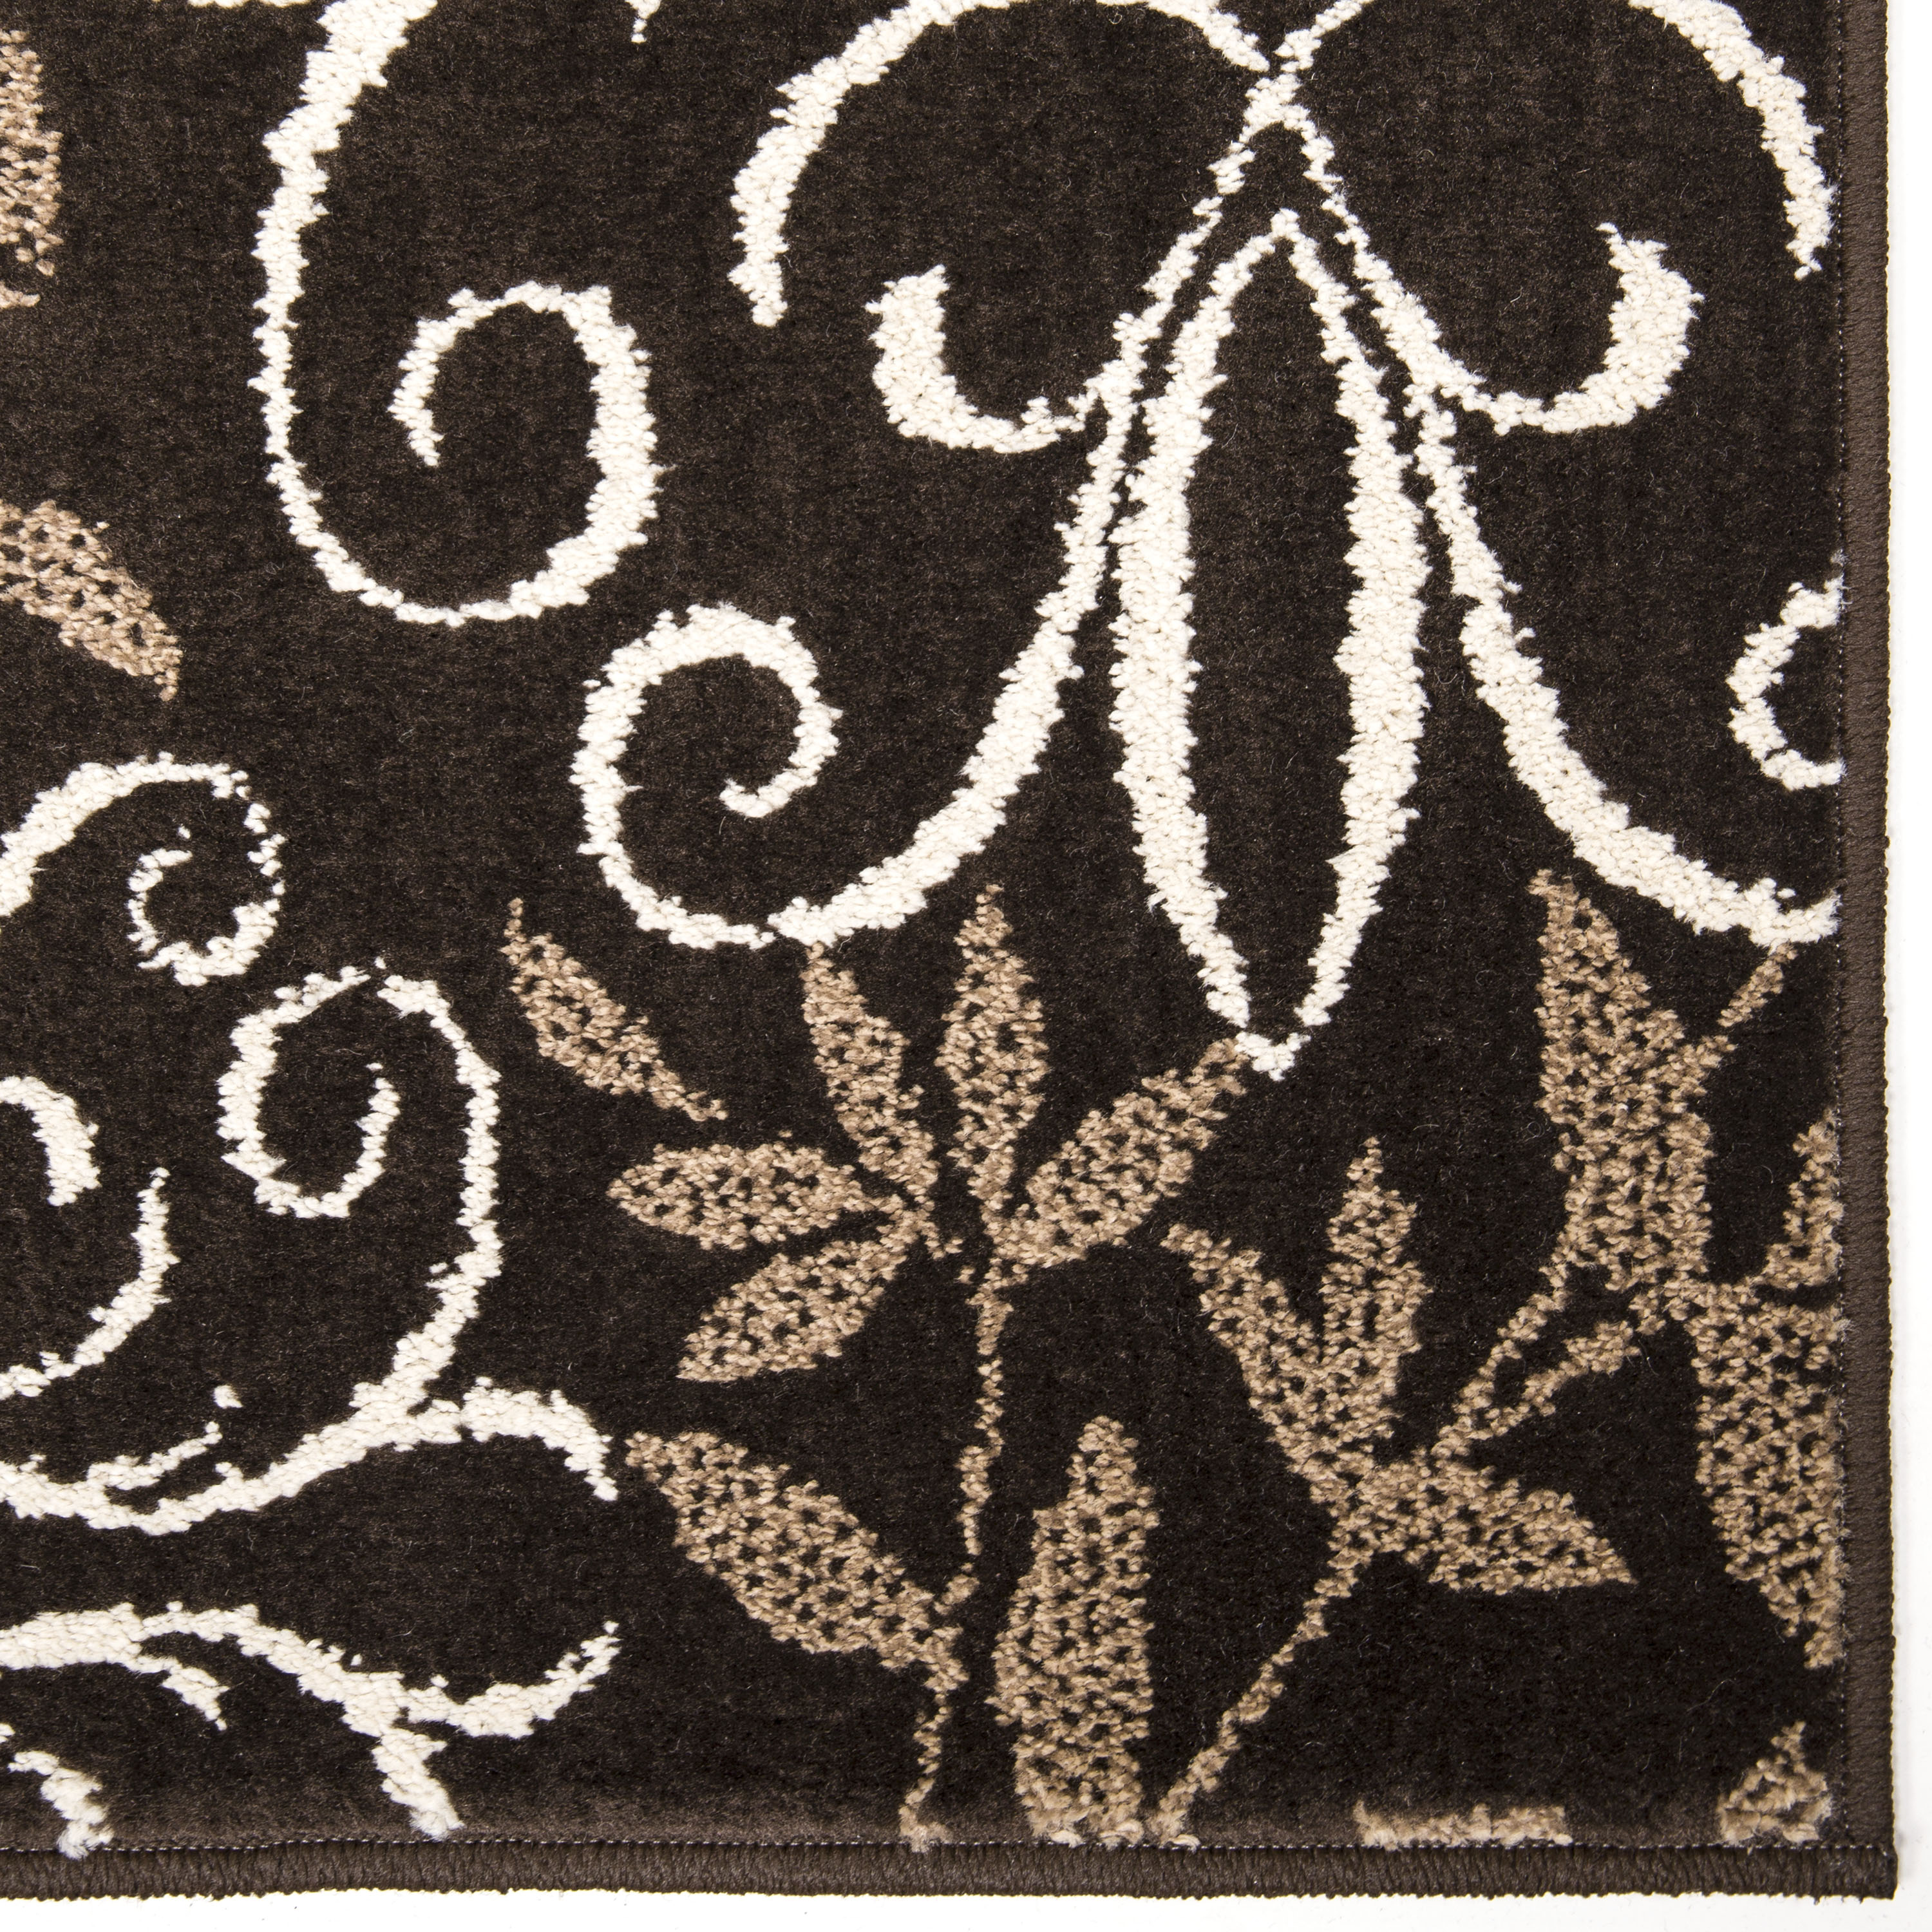 Better Homes & Gardens Iron Fleur Area Rug, Brown, 2'6" x 3'8" - image 5 of 9